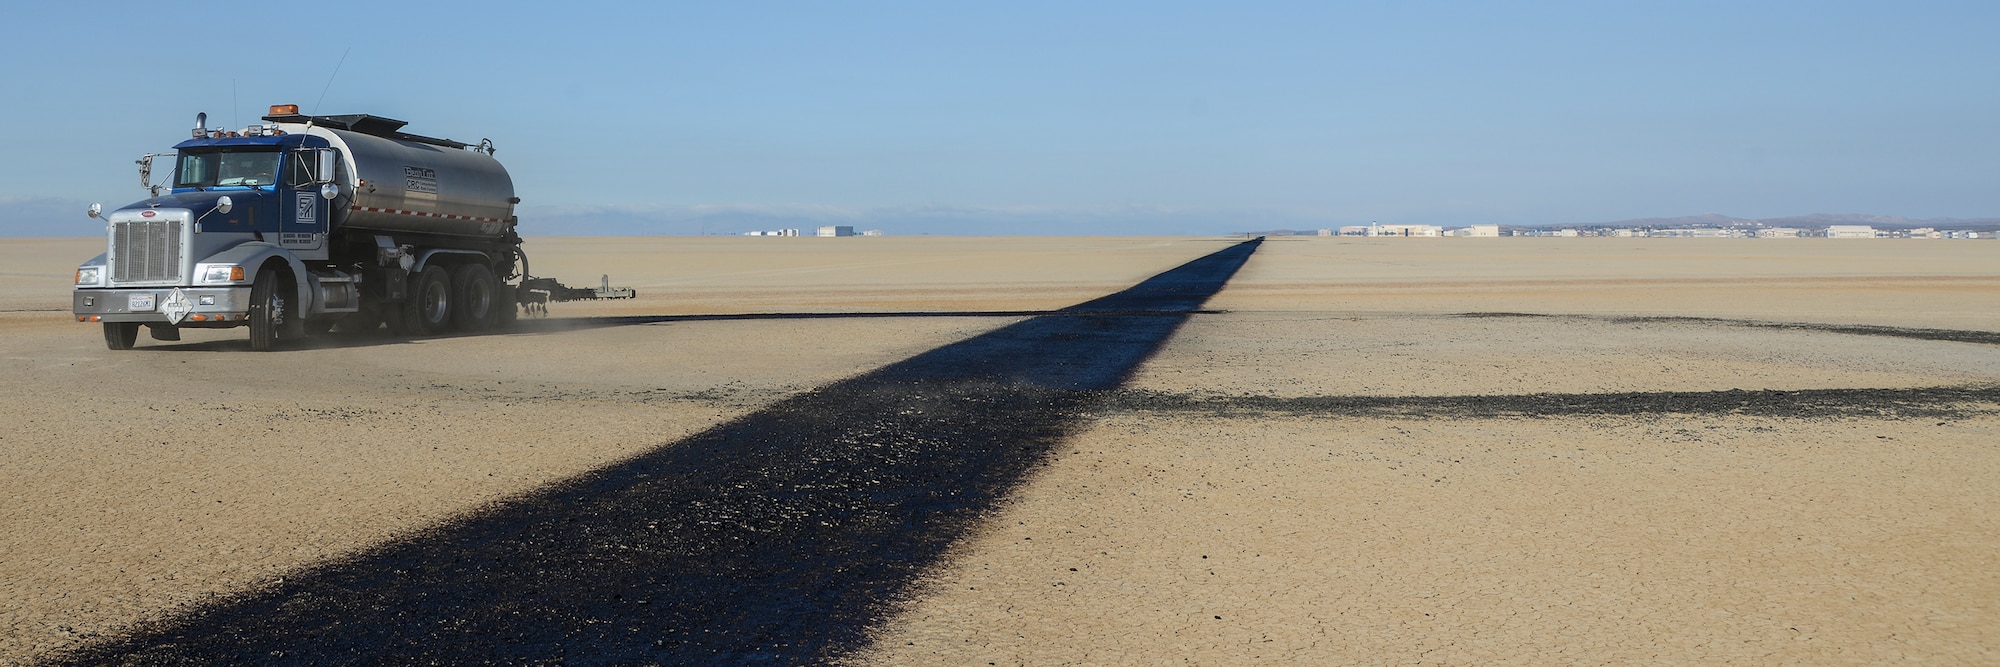 An oil spreader truck applies SSH1 to a quarter-mile marker along the fly-by line as part of the annual lakebed restriping process. (U.S. Air Force photo by Rebecca Amber)